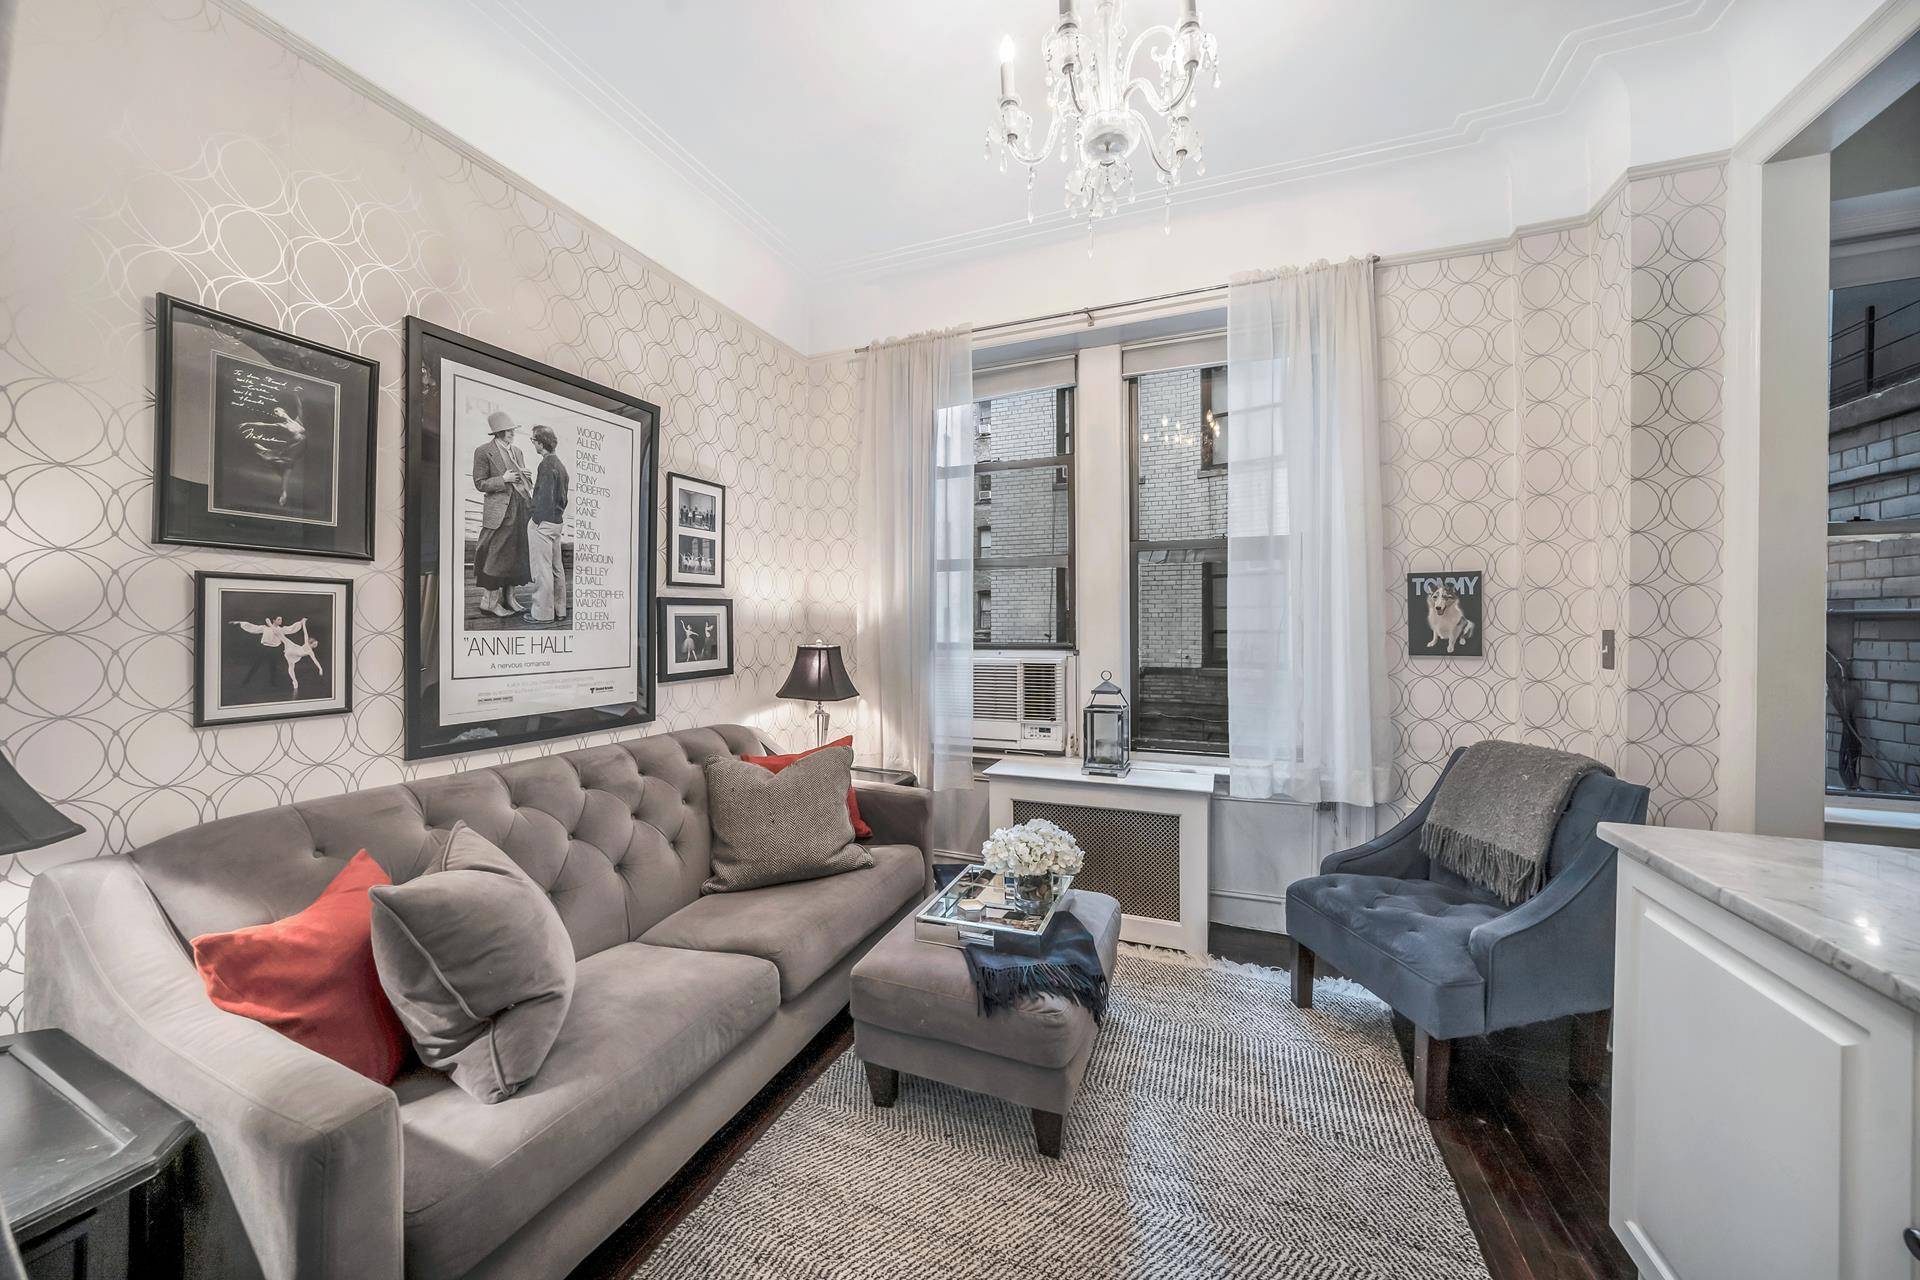 ENCHANTING ONE OF A KIND PREWAR STUDIO Welcome to this charming unconventional studio located on a quiet tree lined street in the heart of the Upper West Side.